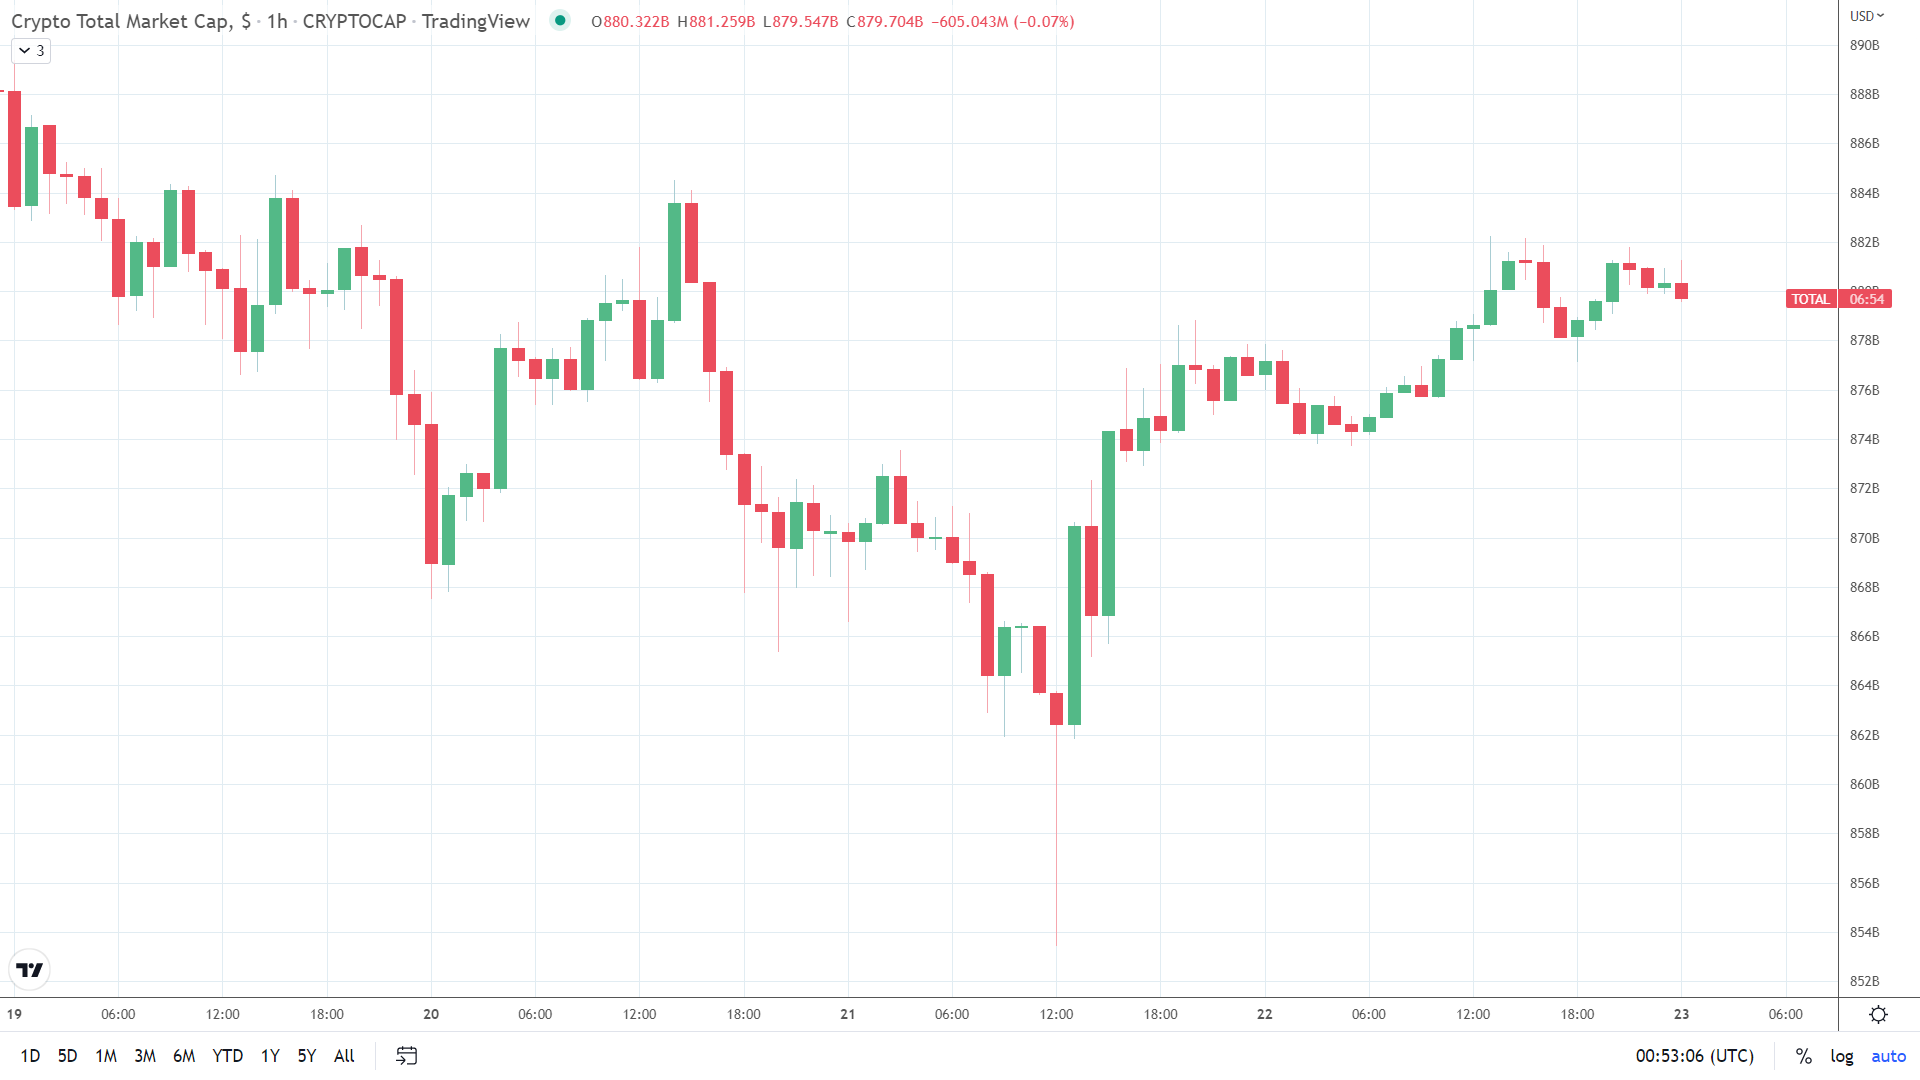 Crypto market range-bound, leading to a fall in liquidations.